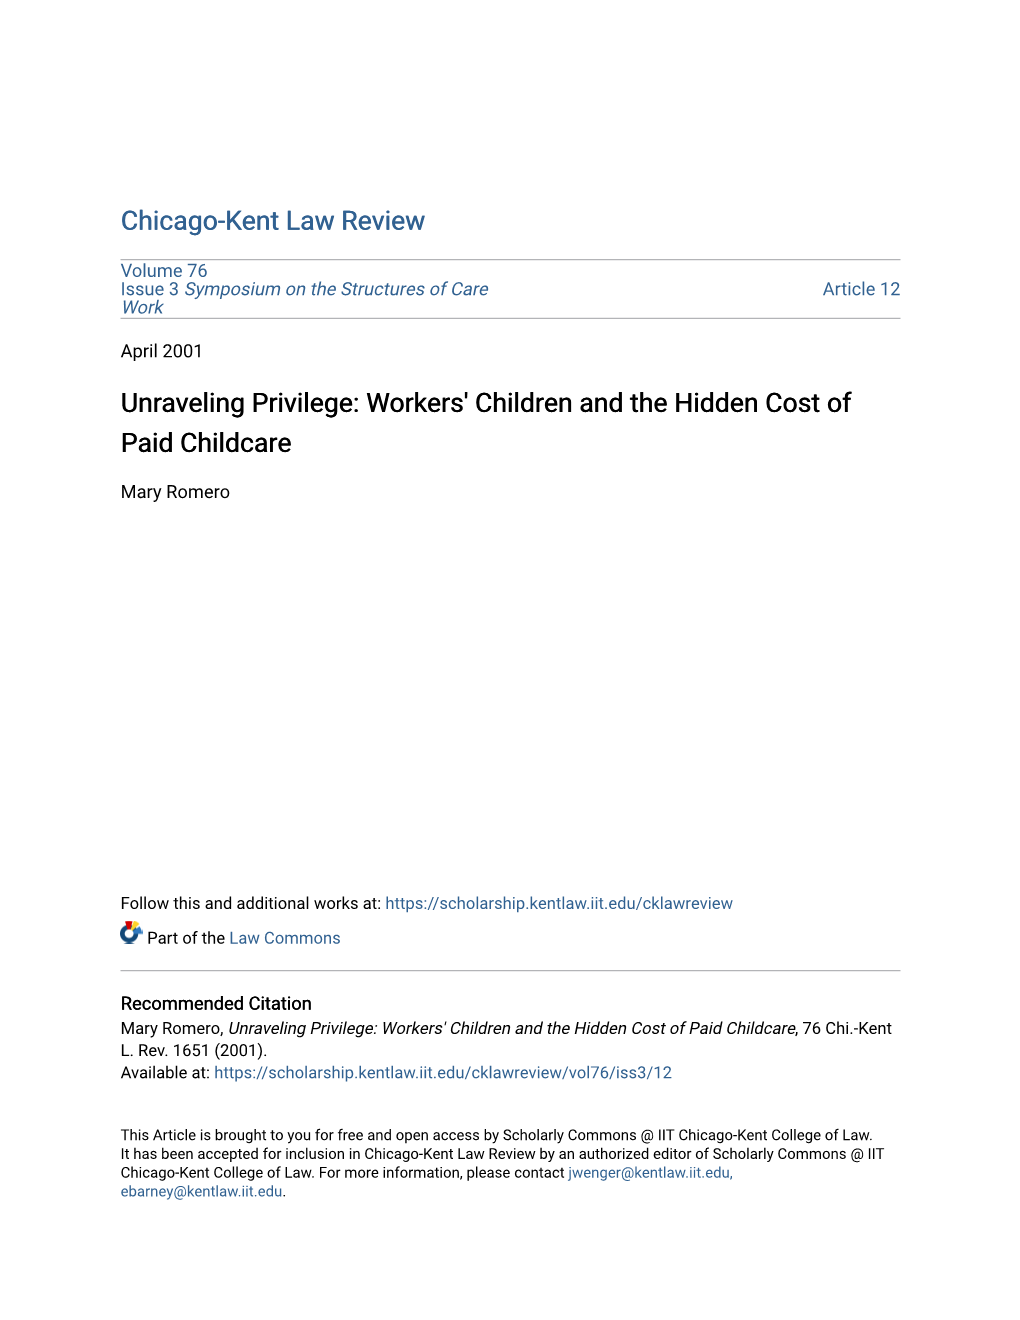 Workers' Children and the Hidden Cost of Paid Childcare